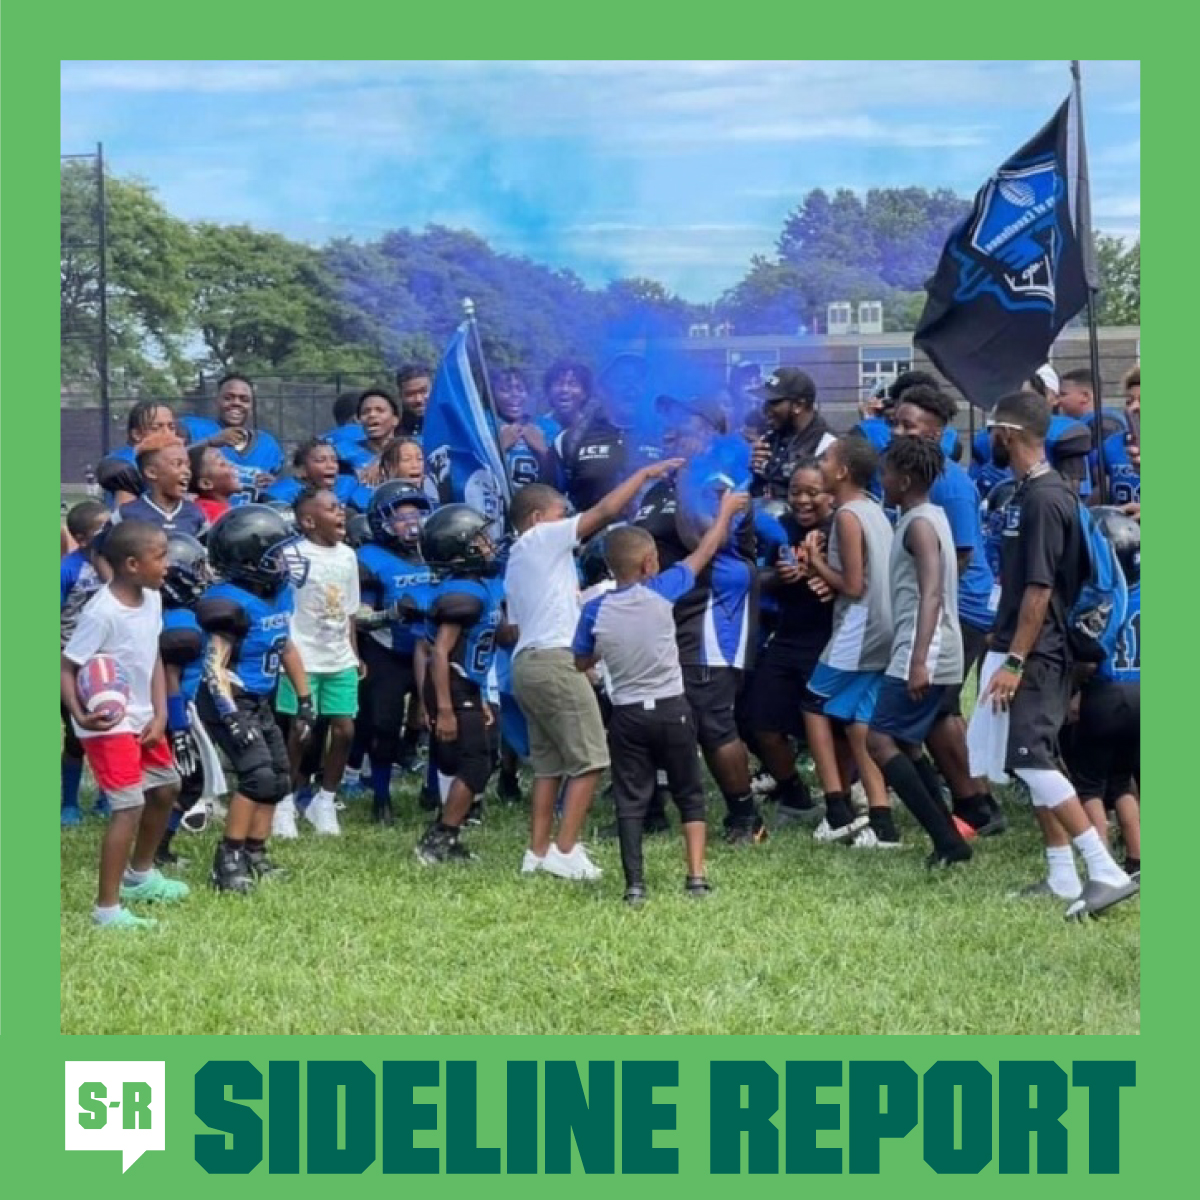 We’re pleased to share that The DICK’S Sporting Goods Foundation awarded $75,000 to Columbus ICE, a youth sports organization that serves under-resourced communities, as part of the 75for75 Sports Matter Grant Program. Check out the full story! ow.ly/gB0U50OSSfA